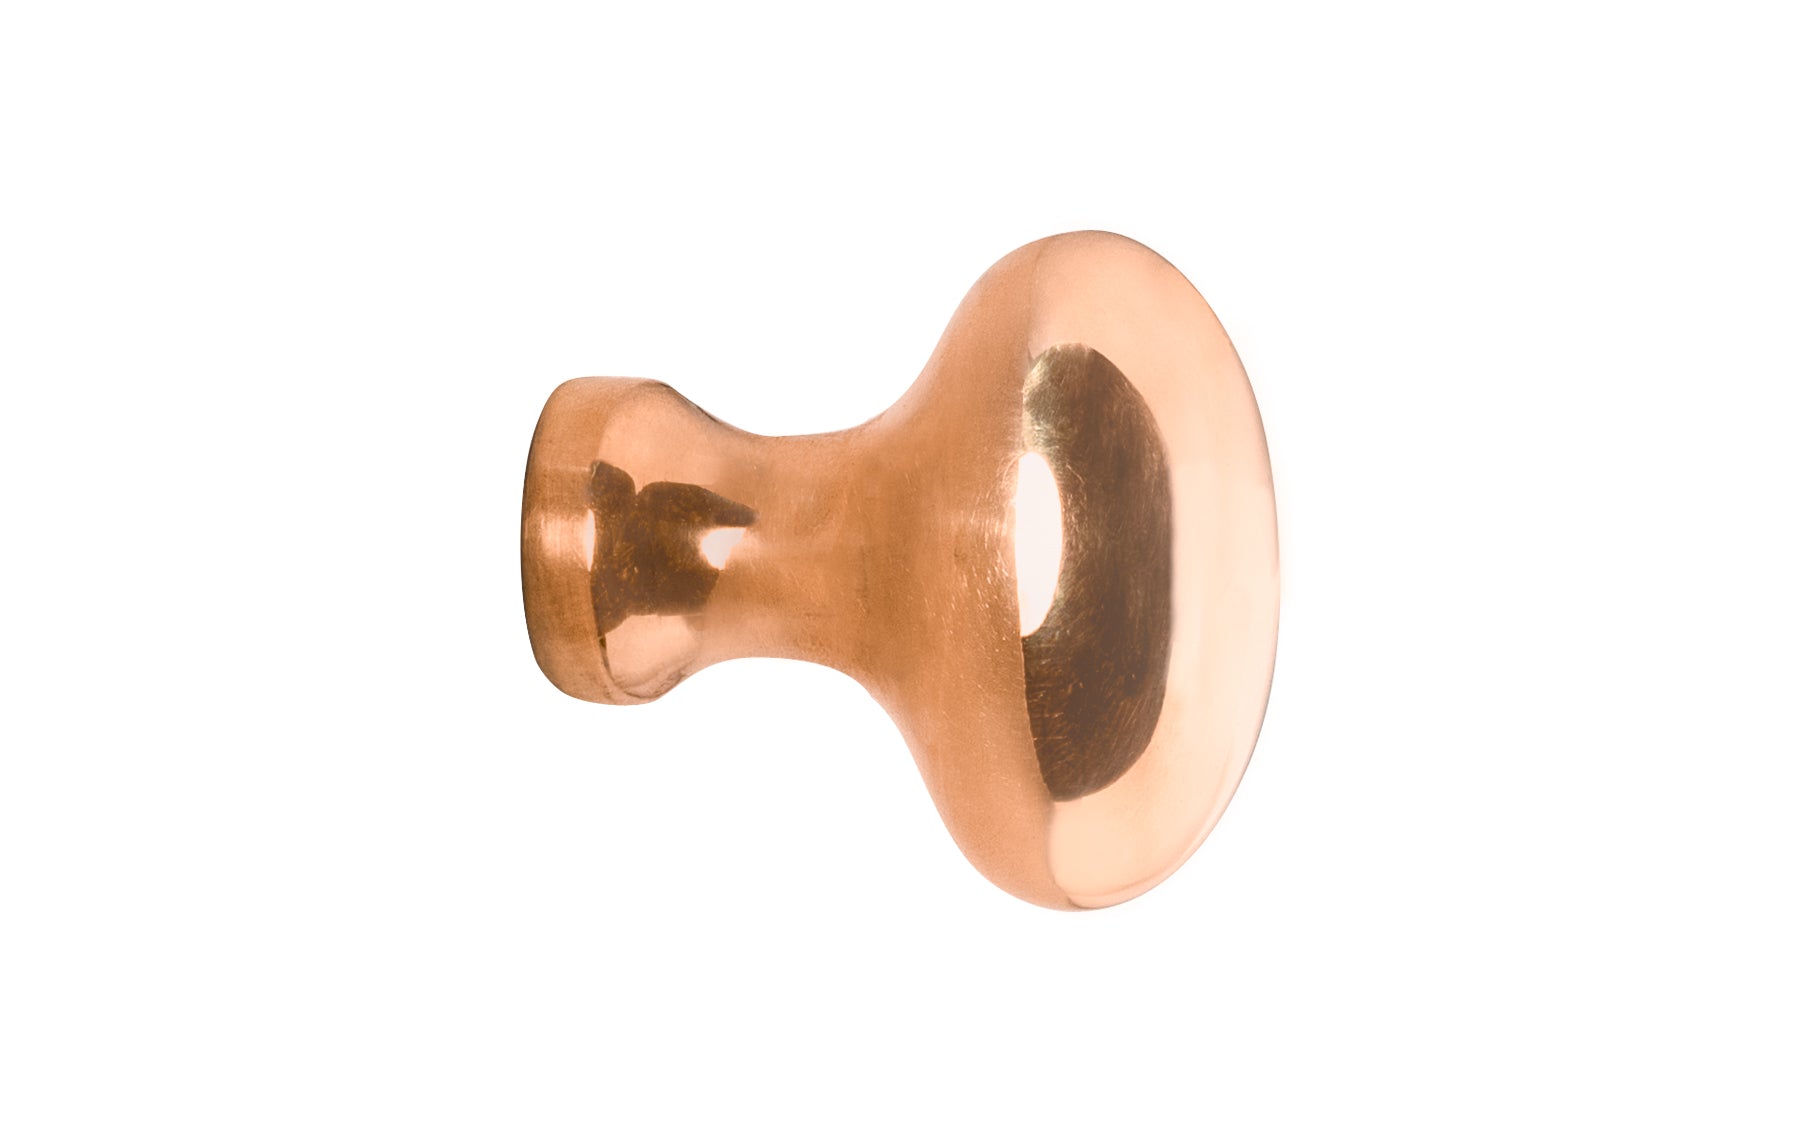 Vintage-style Hardware · Classic & Traditional Solid Brass Cabinet Oval Knob. 1-1/4" length size knob. Quality solid brass core, this stylish knob has a smooth & weighty fee. May be mounted vertically or horizontally. Great for kitchens, bathrooms, on furniture, cabinets, drawers, small doors, cabinet doors. Polished Copper Finish.